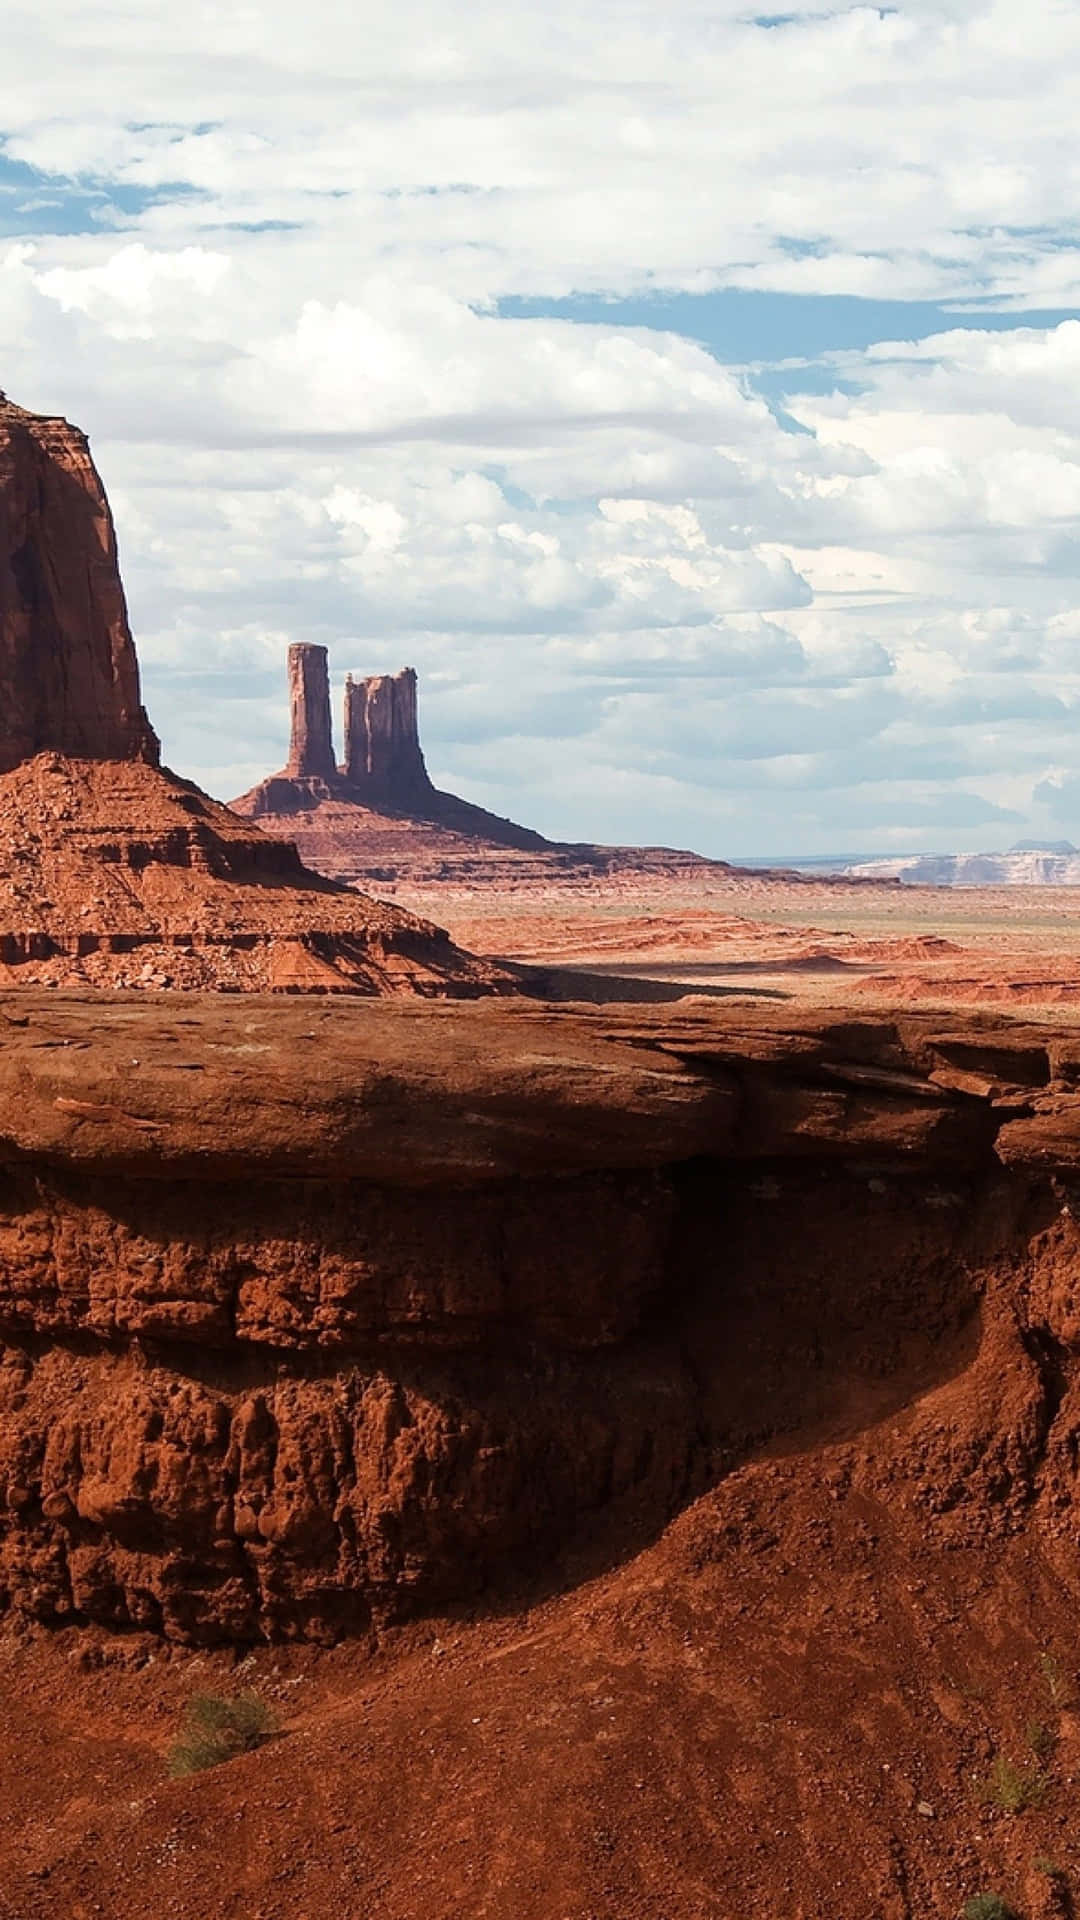 Monumentvalley, Arizona Would Be Translated To 